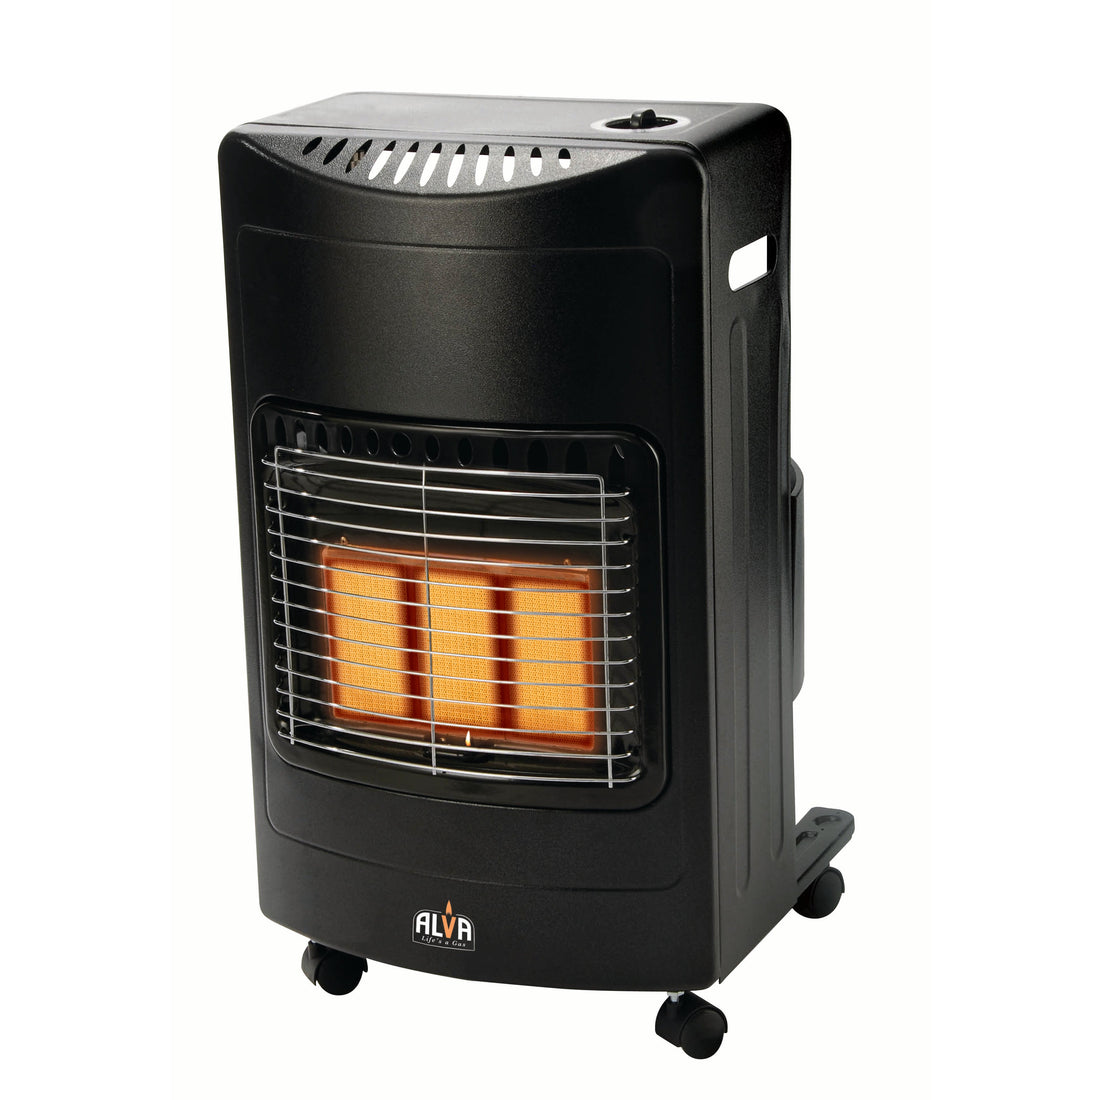 3 PANEL LUXURIOUS INFRARED RADIANT INDOOR GAS HEATER